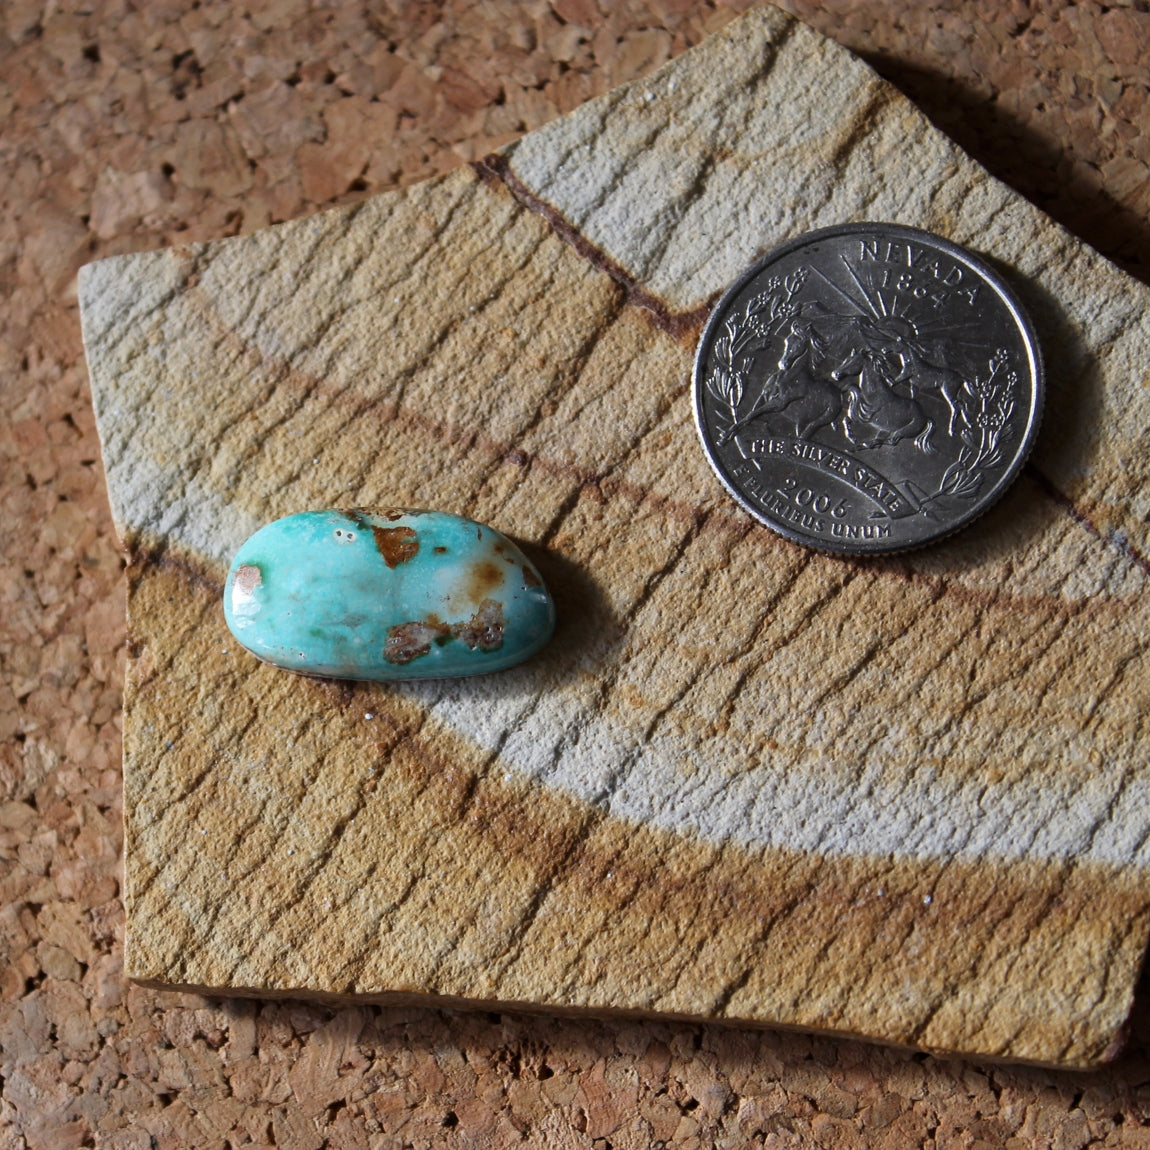 9.9 carat blue Stone Mountain Turquoise cabochon with red inclusions